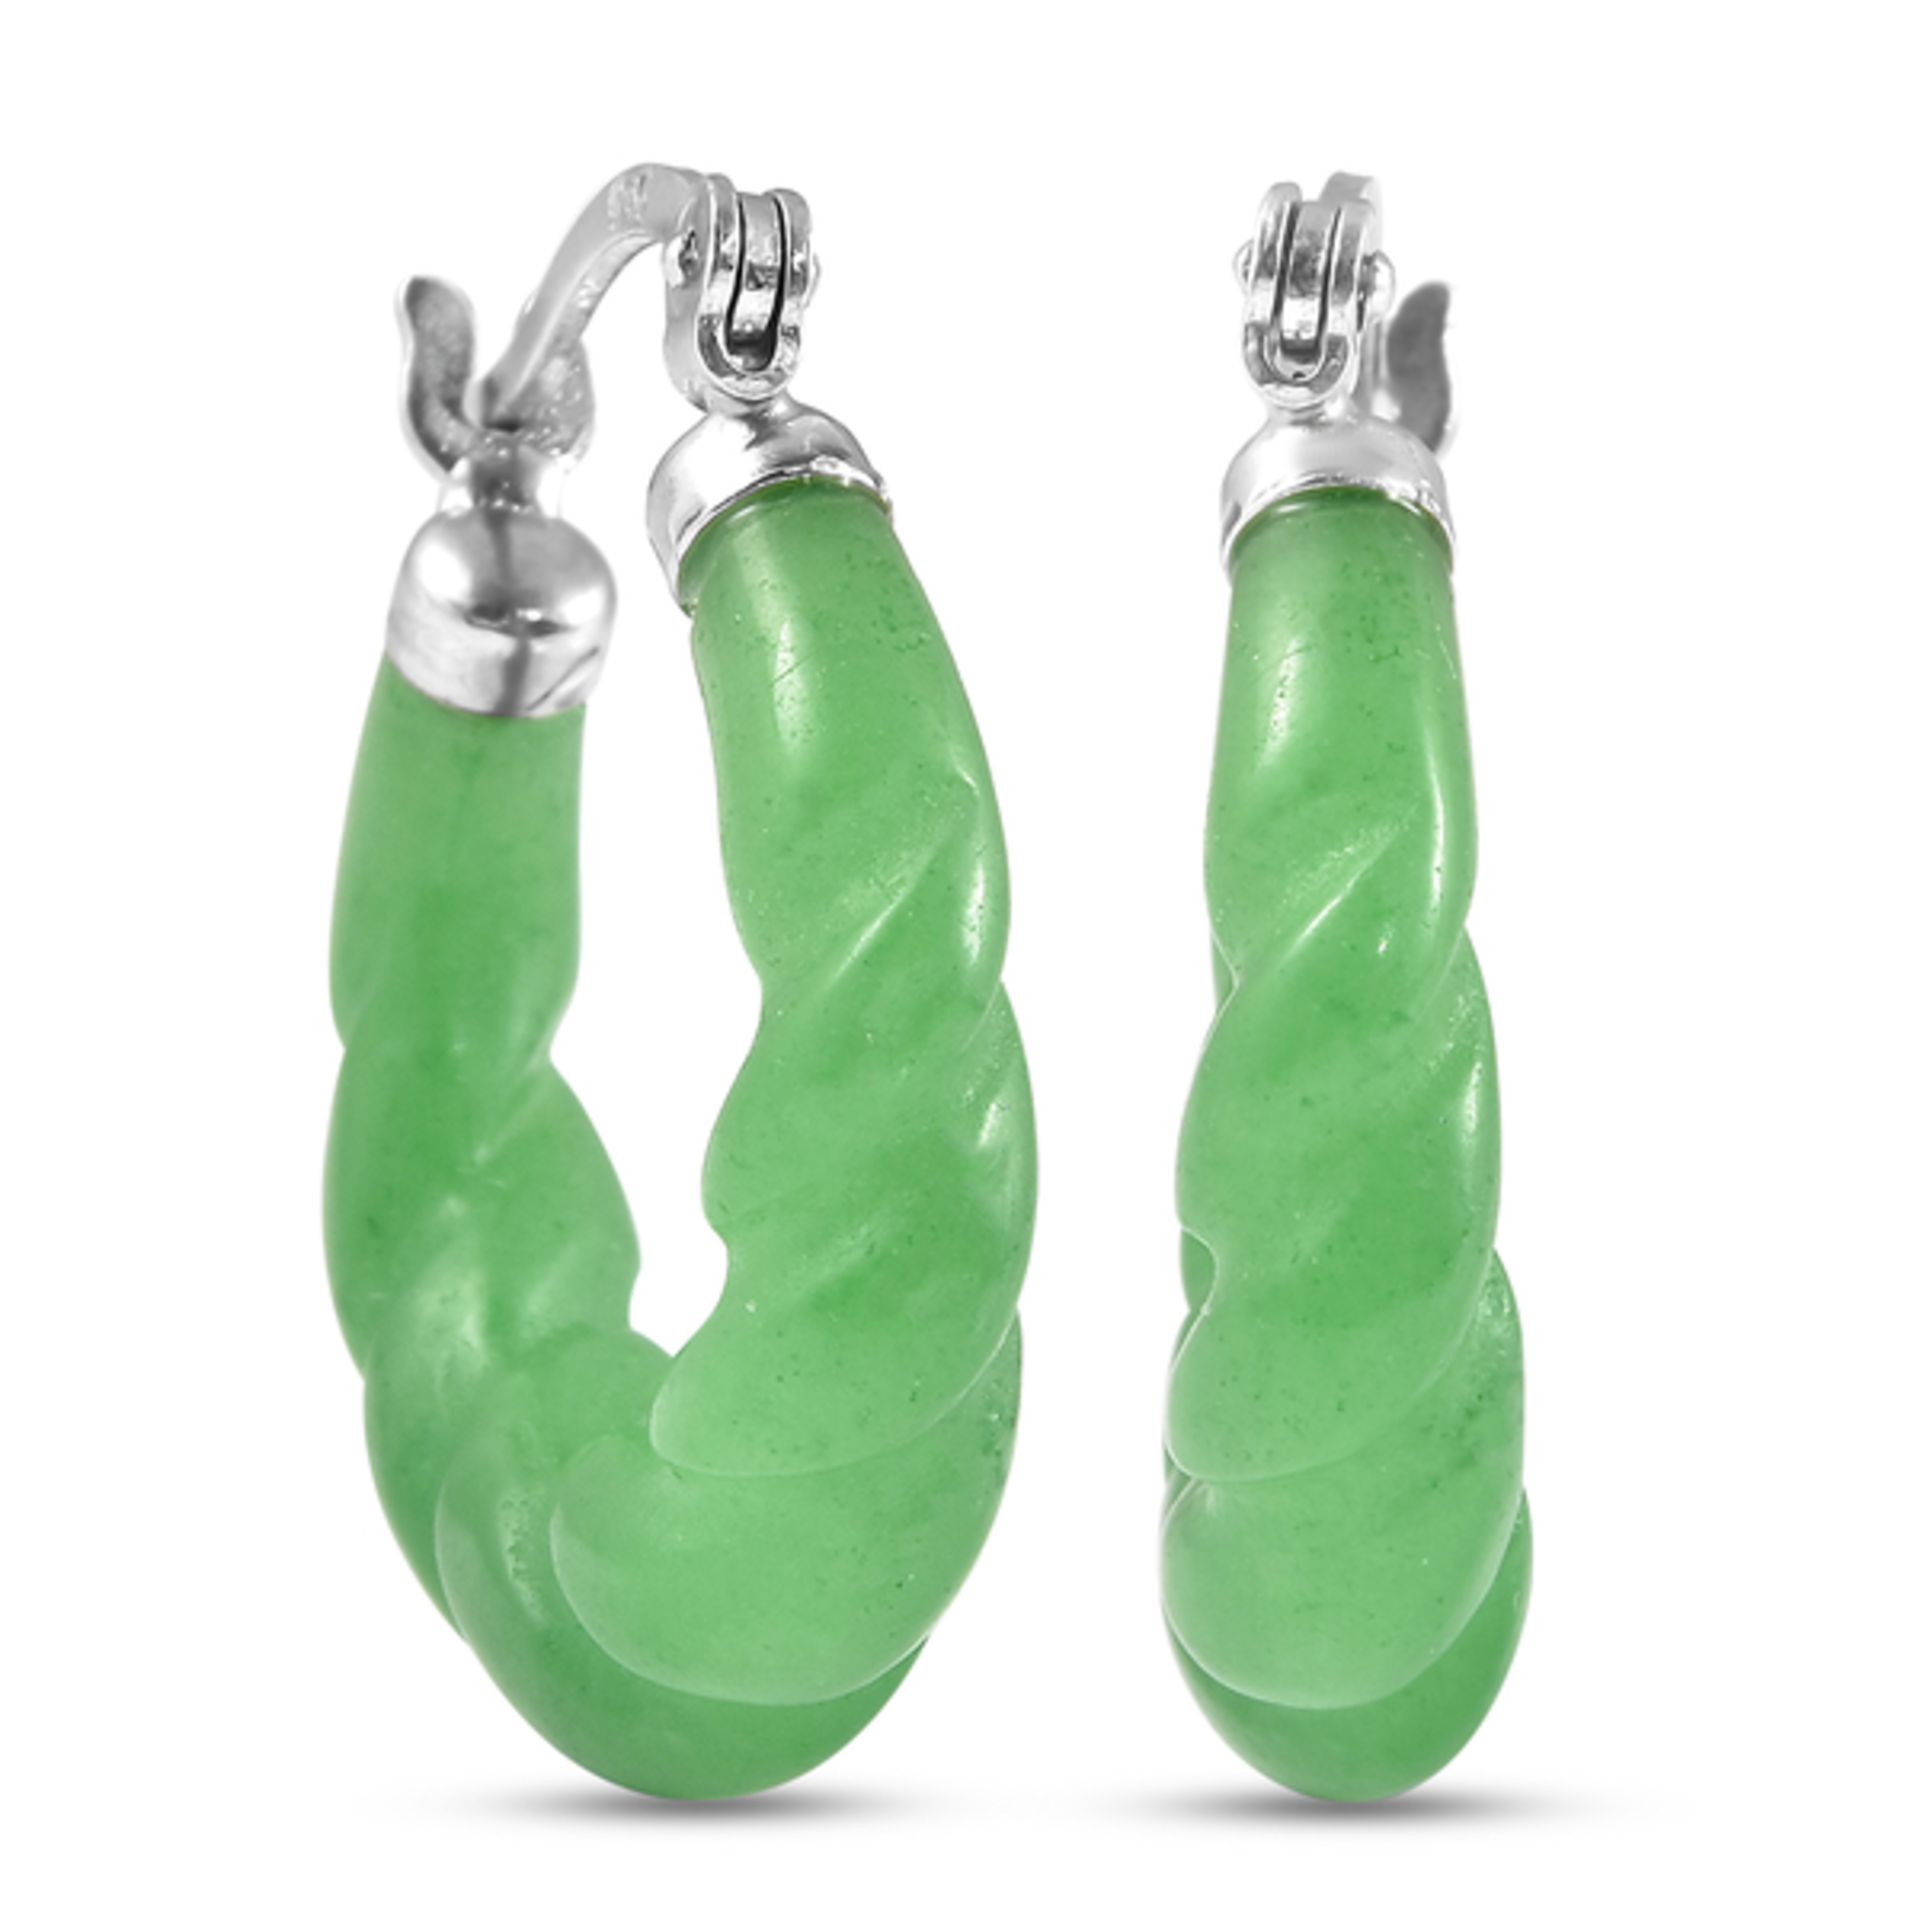 New! Designer Inspired- Carved Green Jade Twisted Earrings In Sterling Silver - Image 2 of 3